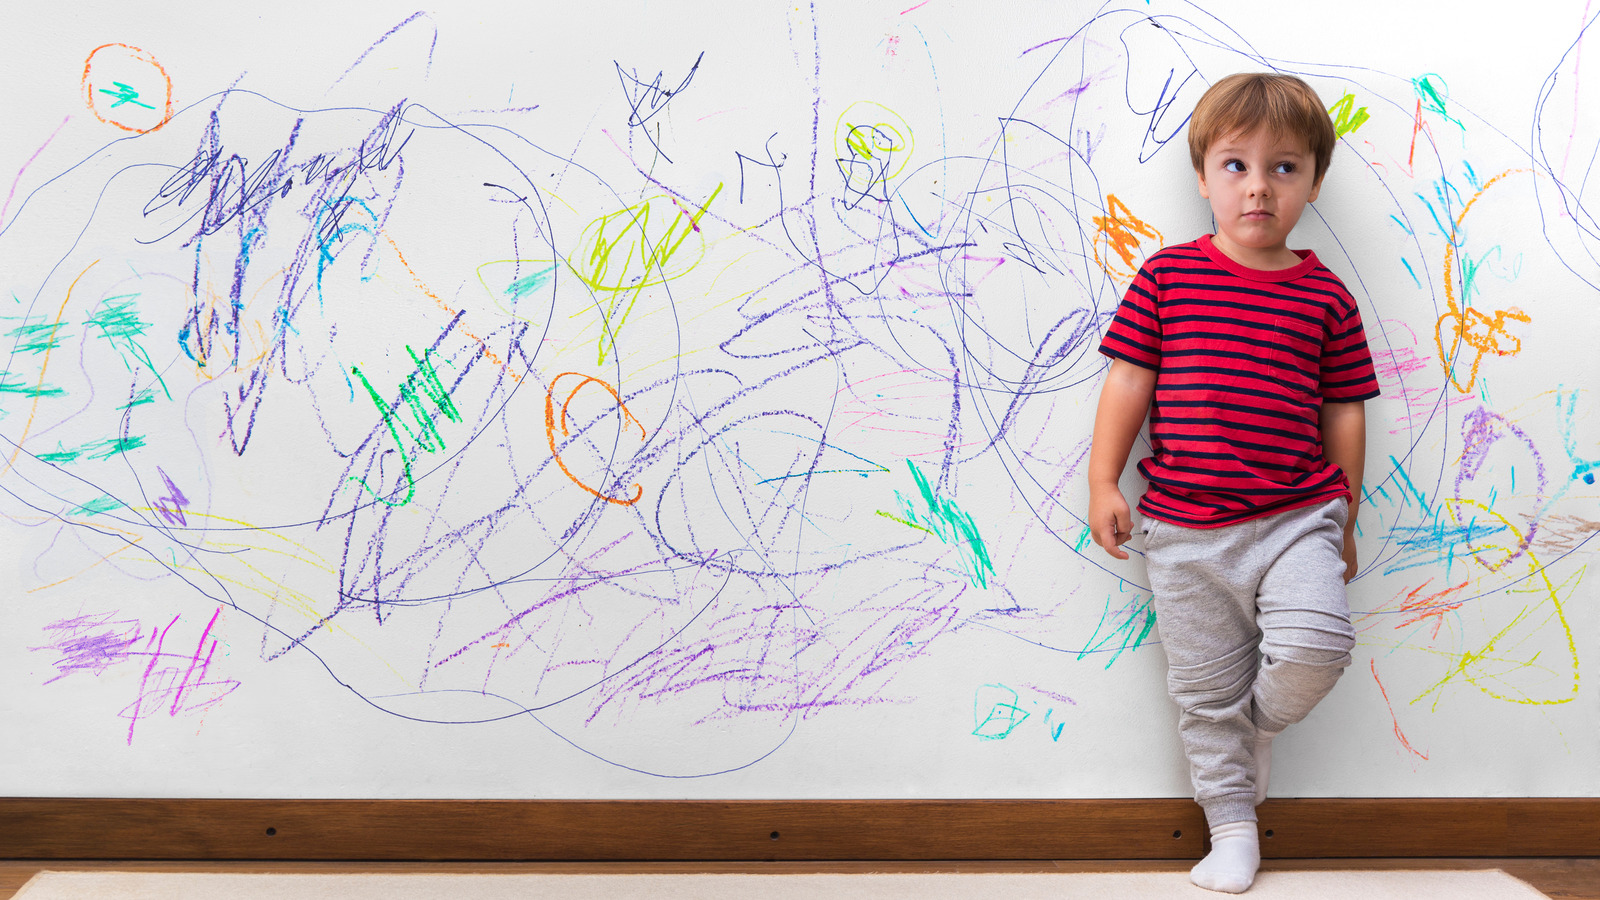 7 Cleaning Products To Remove Kids' Drawings From The Walls